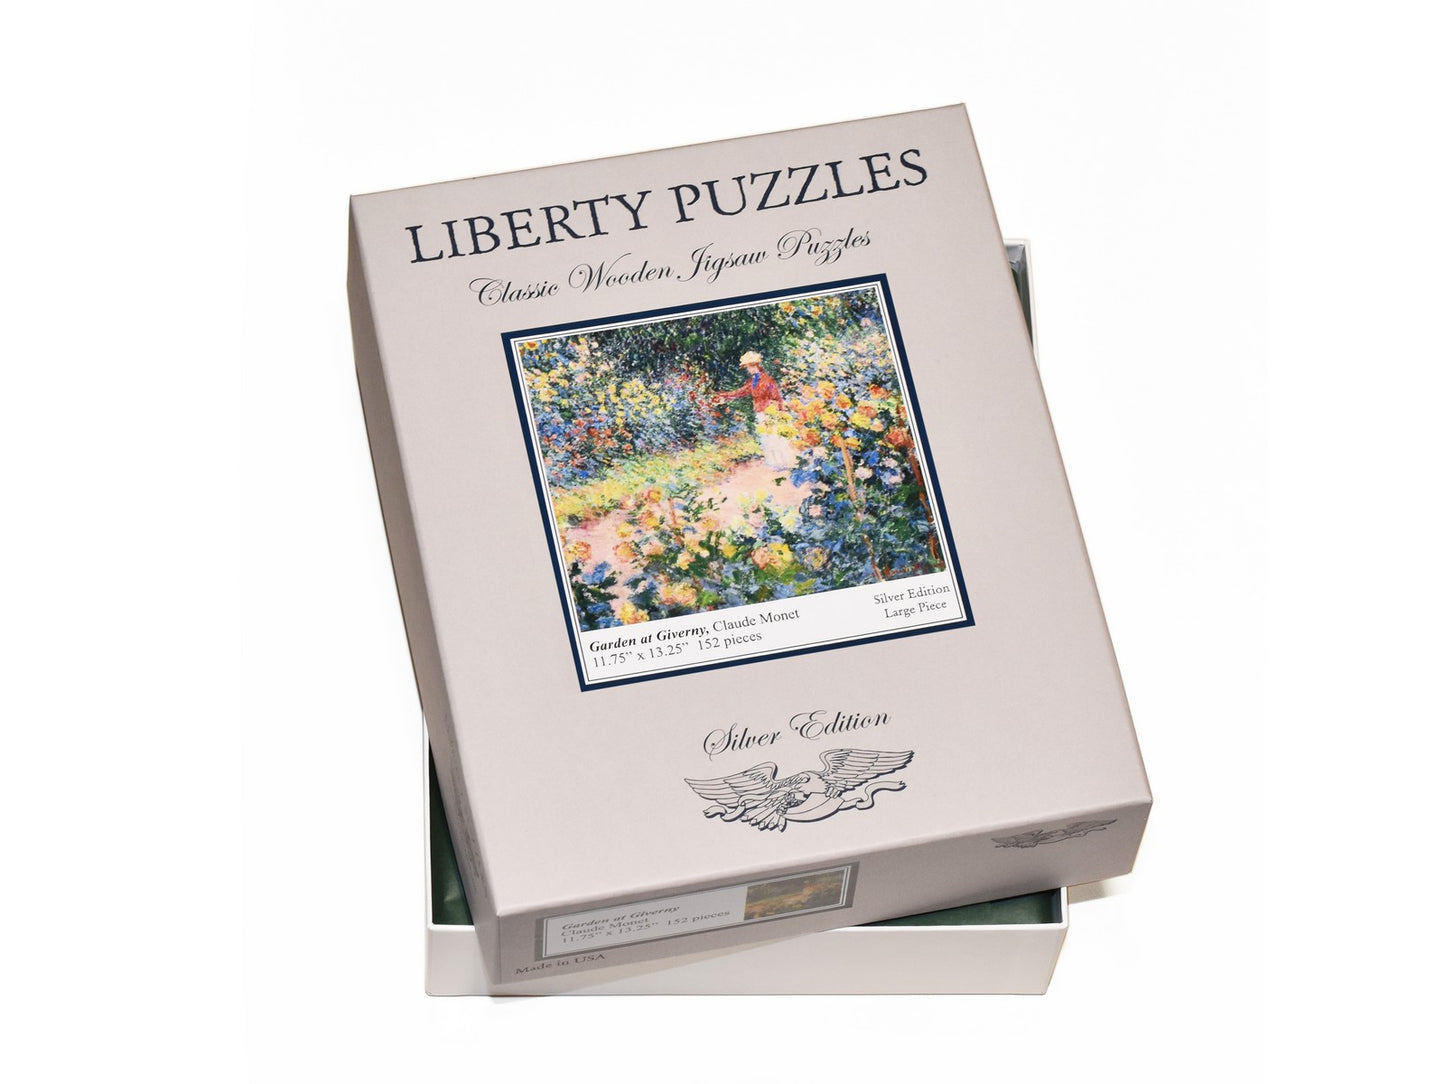 The box for the puzzle, Garden at Giverny.